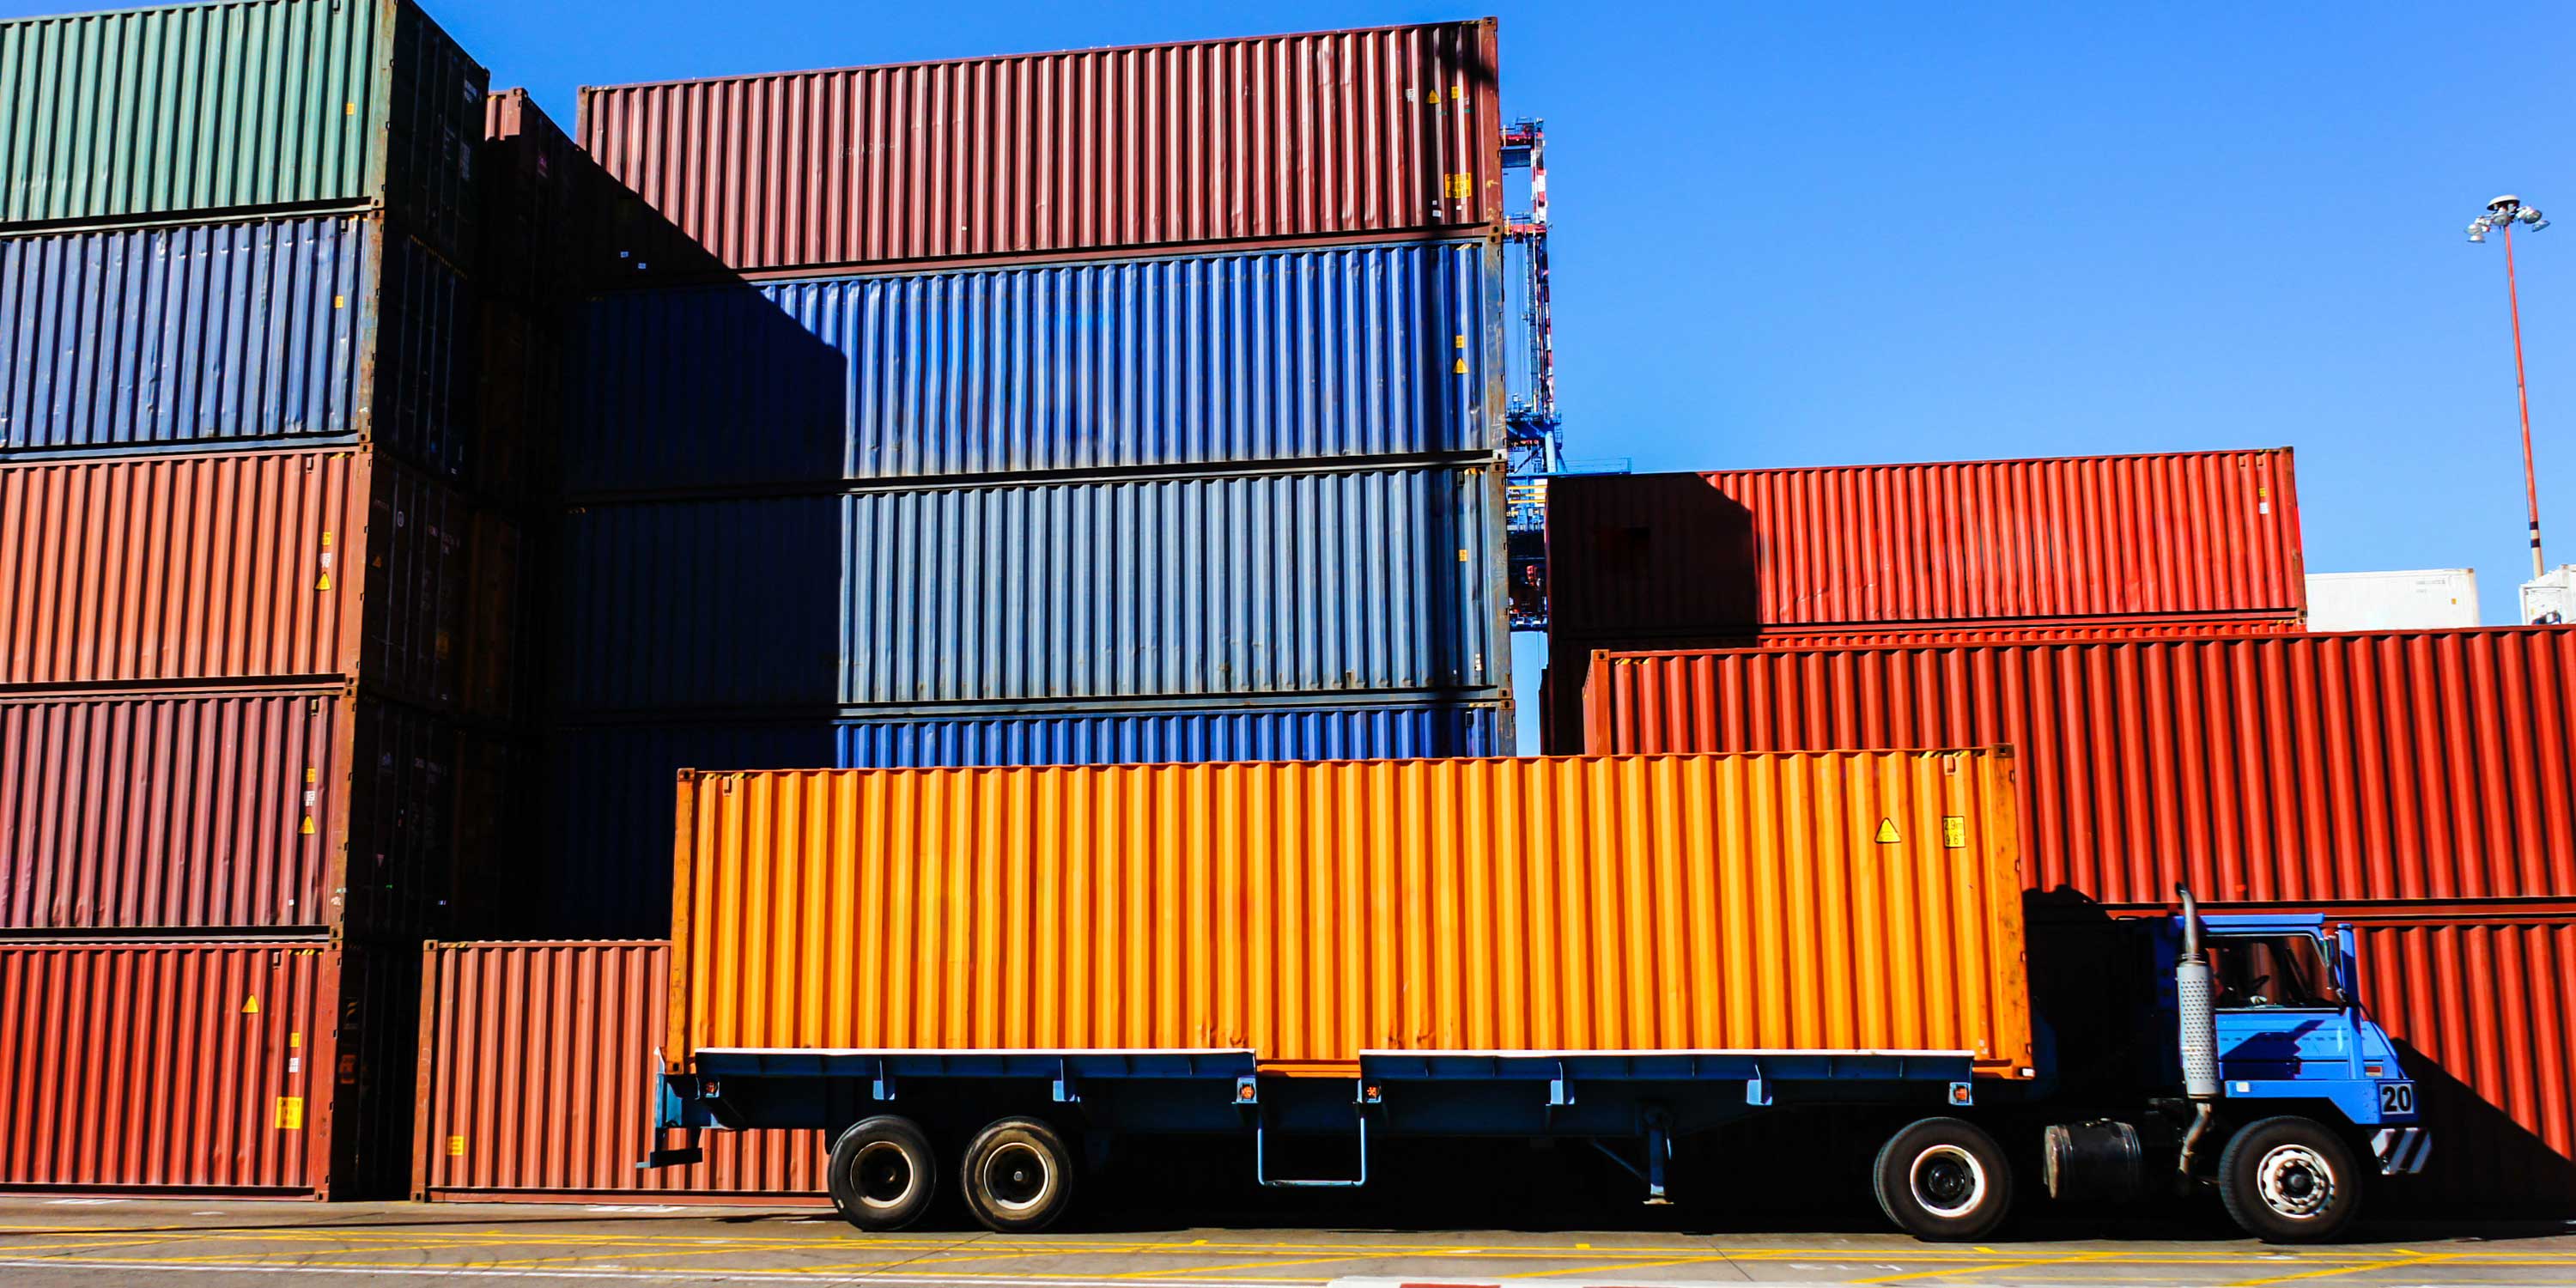 Shipping Containers Market Size, Status, Estimation by Expert 2018 ...